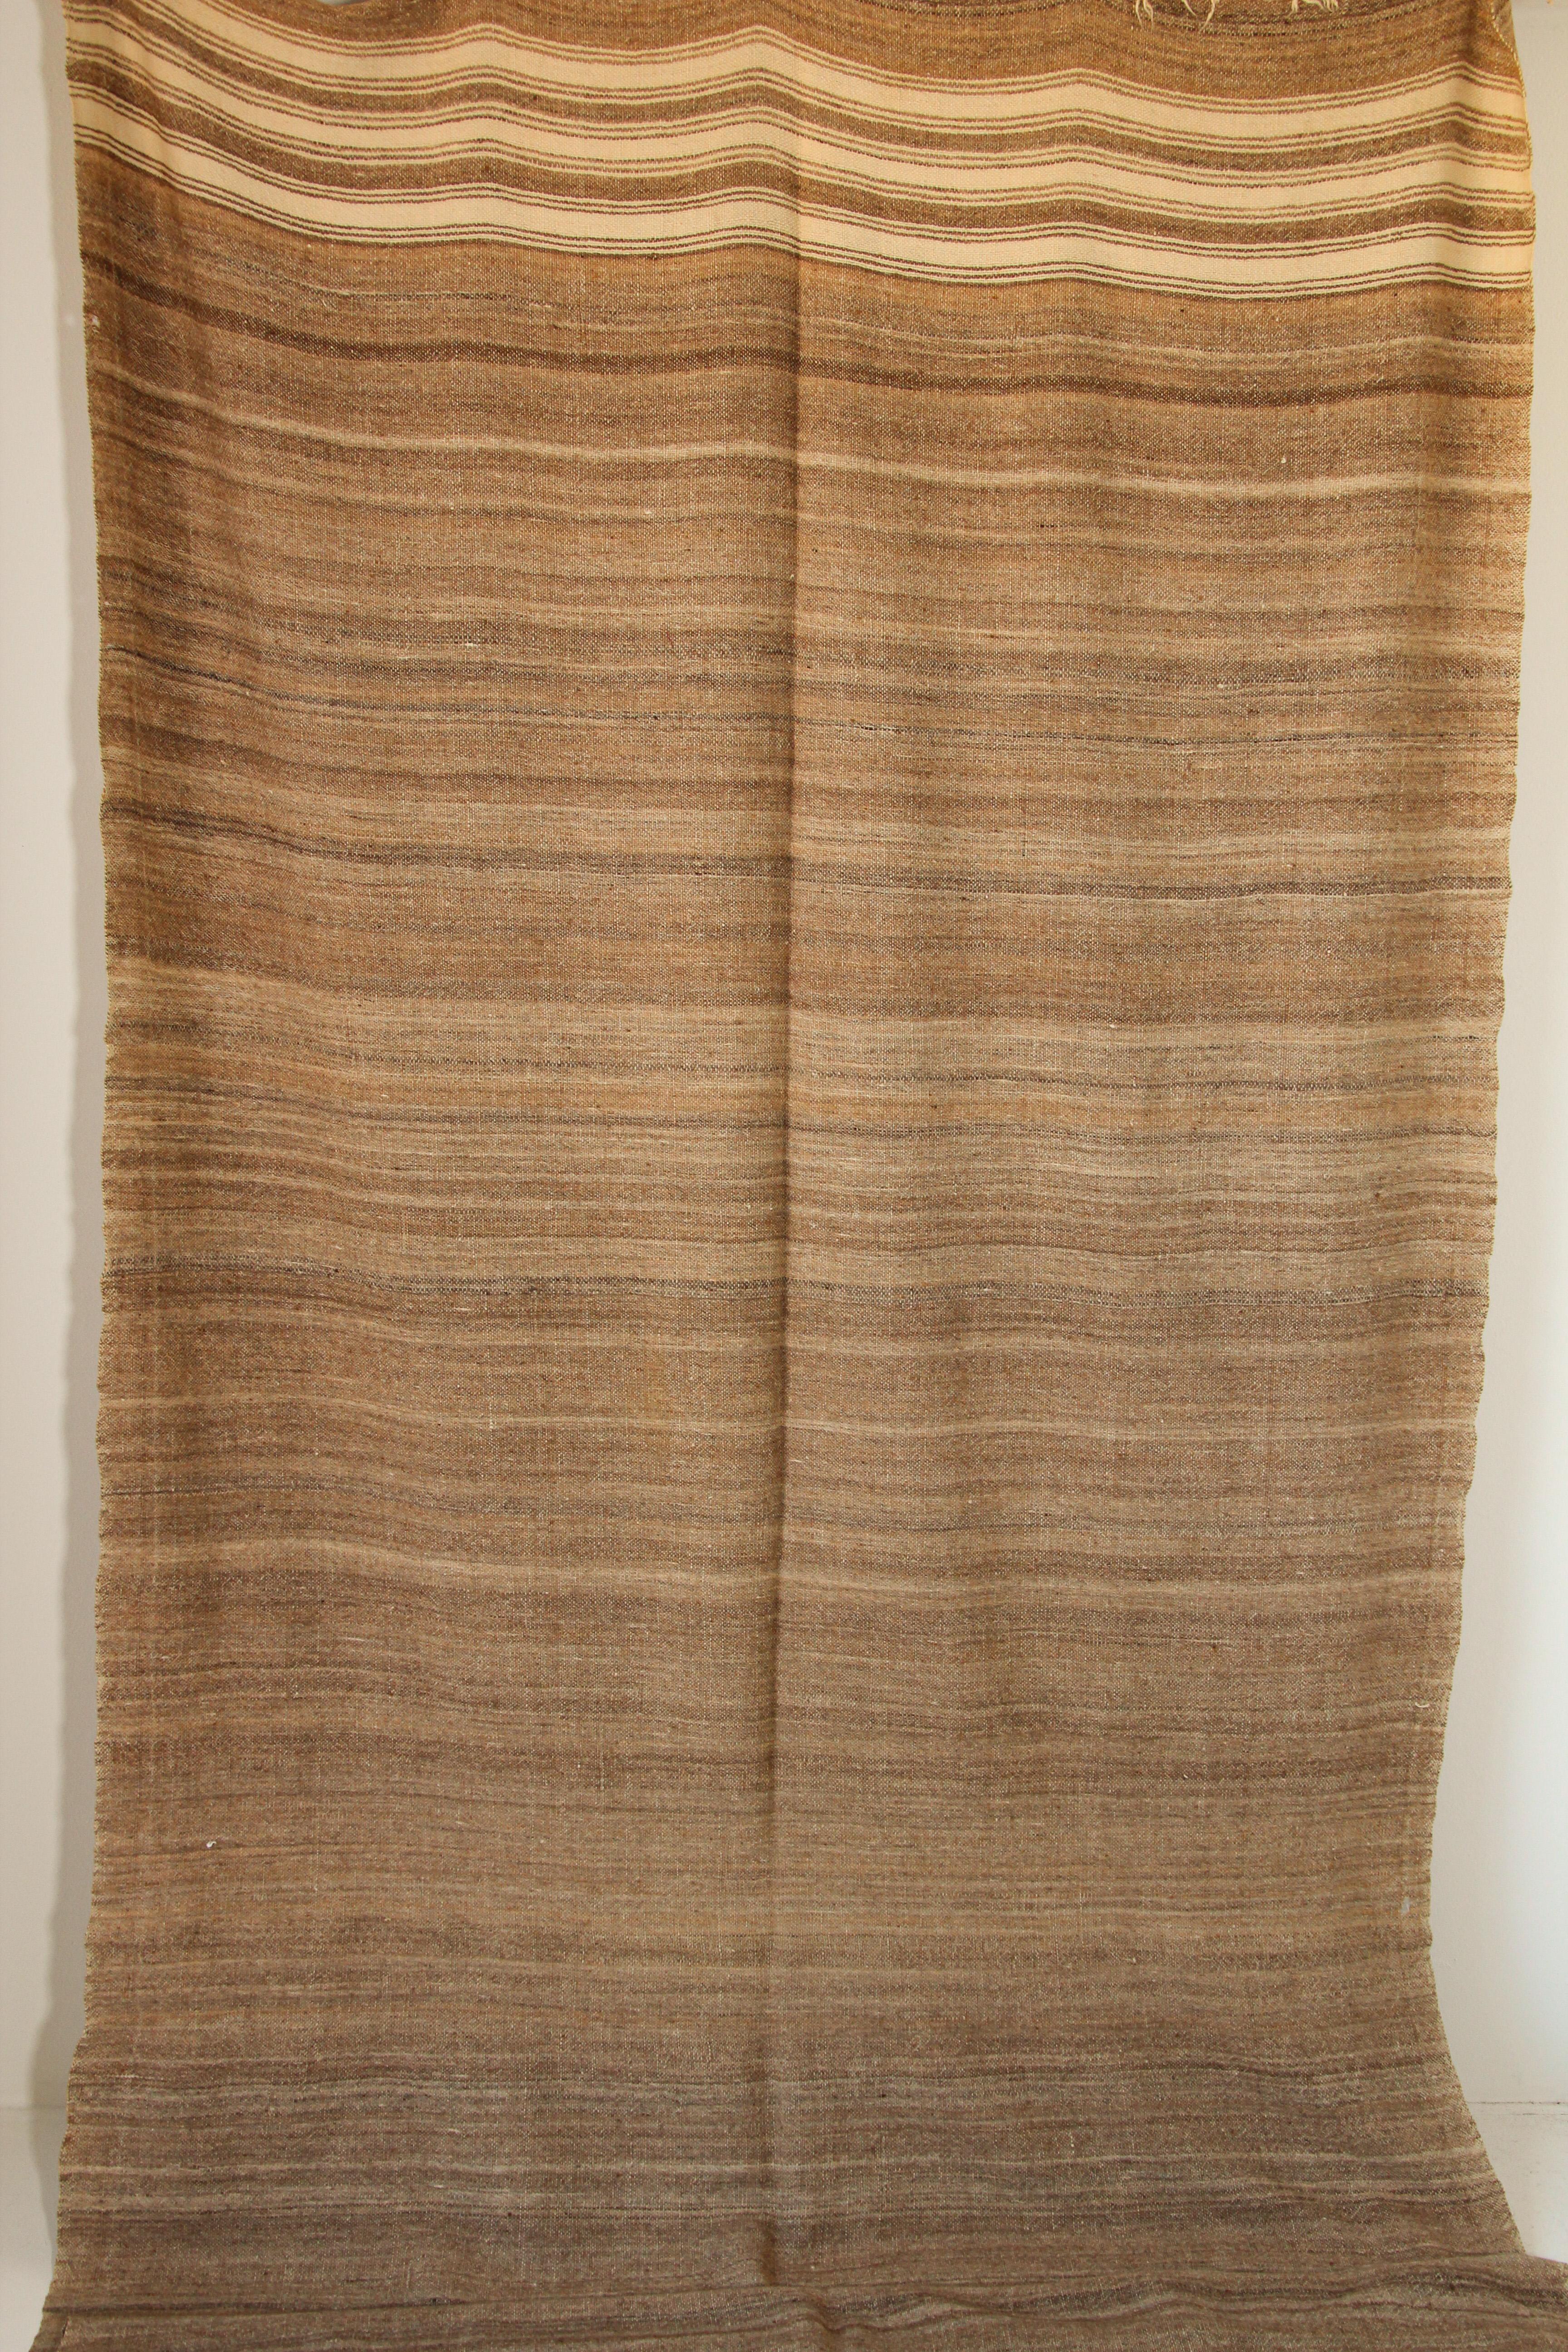 1960s Vintage Moroccan rug flat-weave tribal brown Kilim or blanket.Large size blanket vintage Moroccan rug, handwoven by Berber women in Morocco for their own use.This rug was made using flat-weave technique with linear pattern of alternating